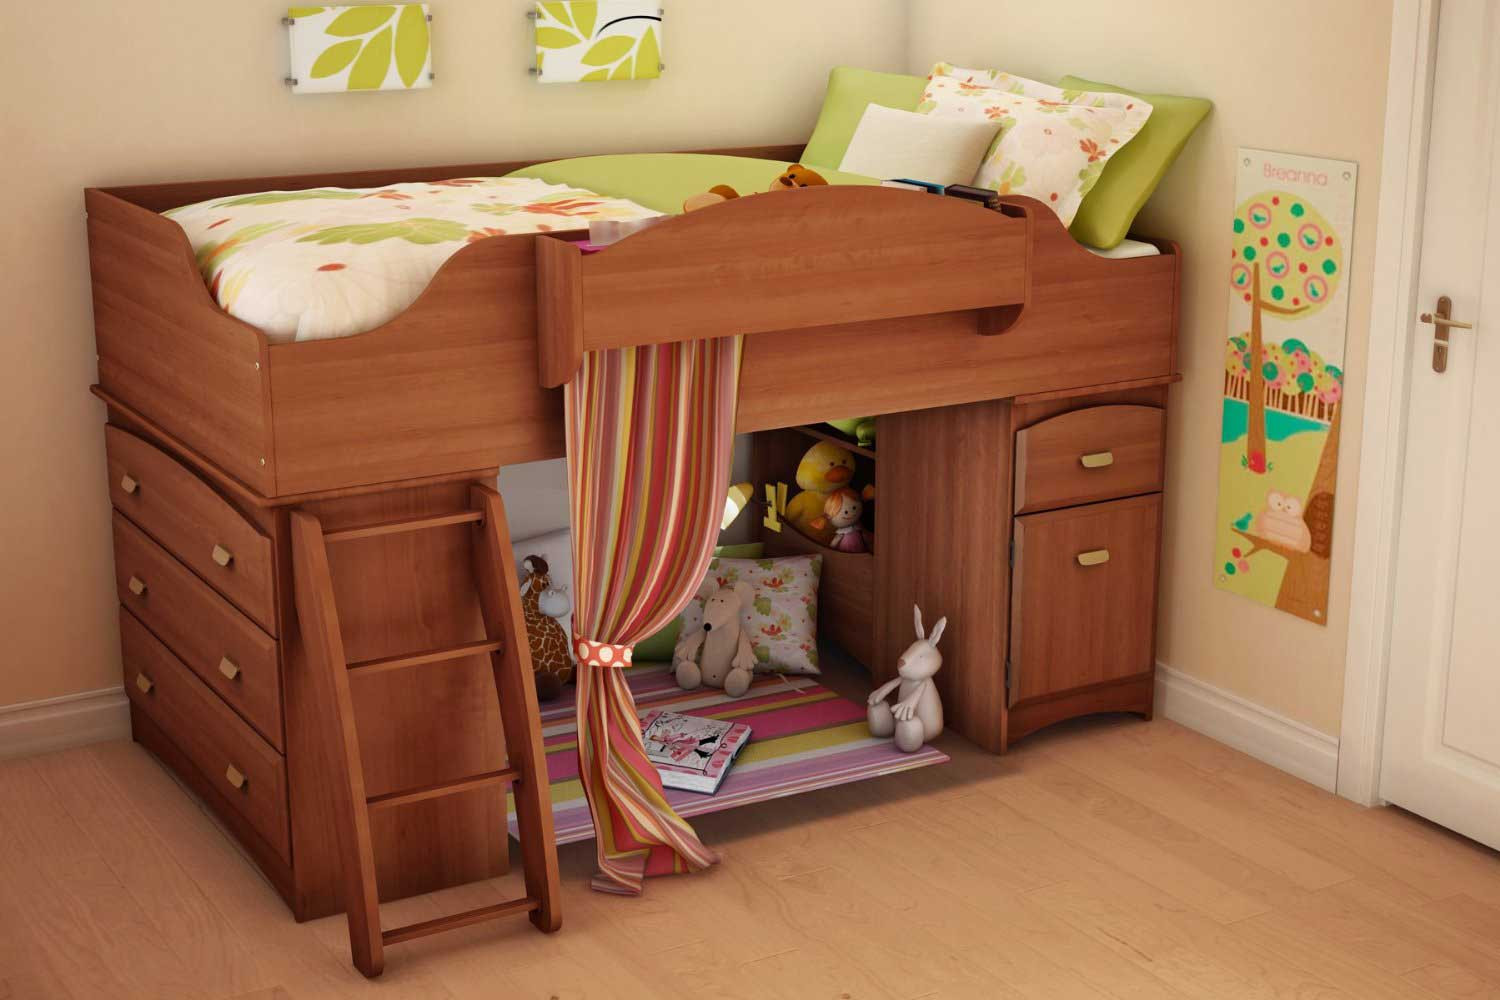 Kids Bunk Beds With Storage
 3 discount bunk beds for kids with 70 percent off and